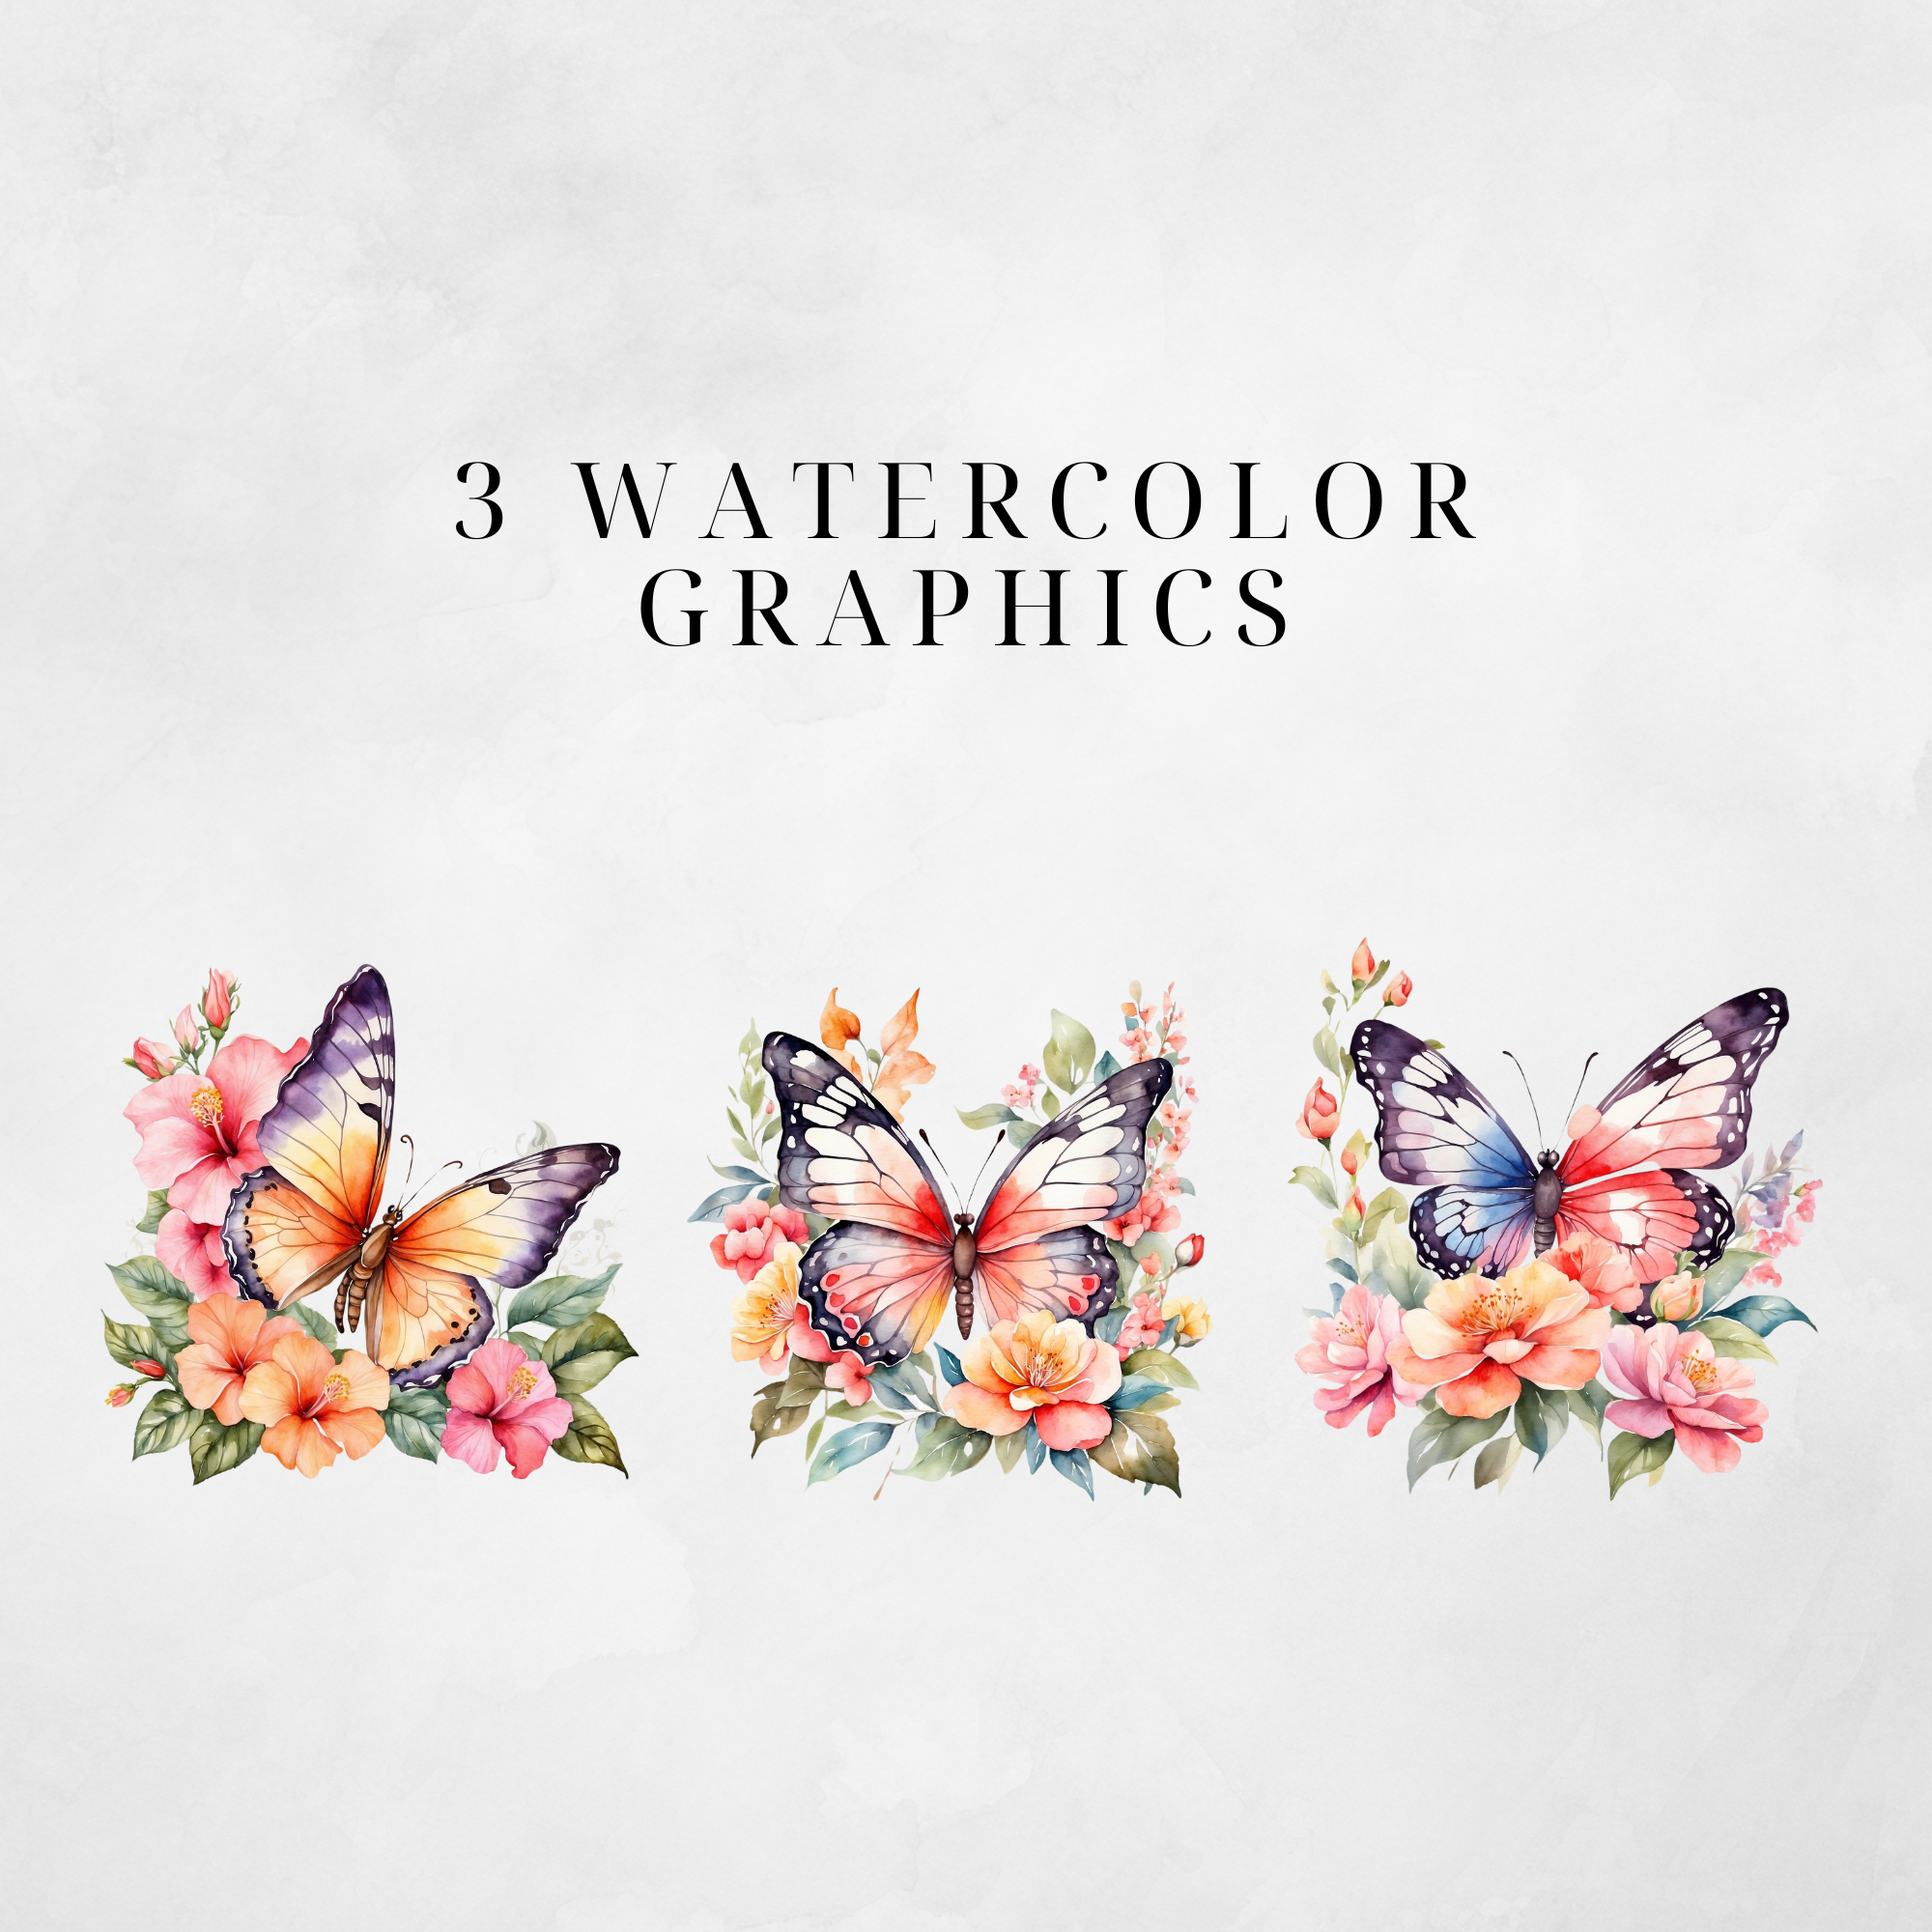 Elegant and Colorful Butterfly Clipart, Rainbow Watercolor Butterflies And Flowers Bundle, transparent png, Butterfly Wings, Commercial use